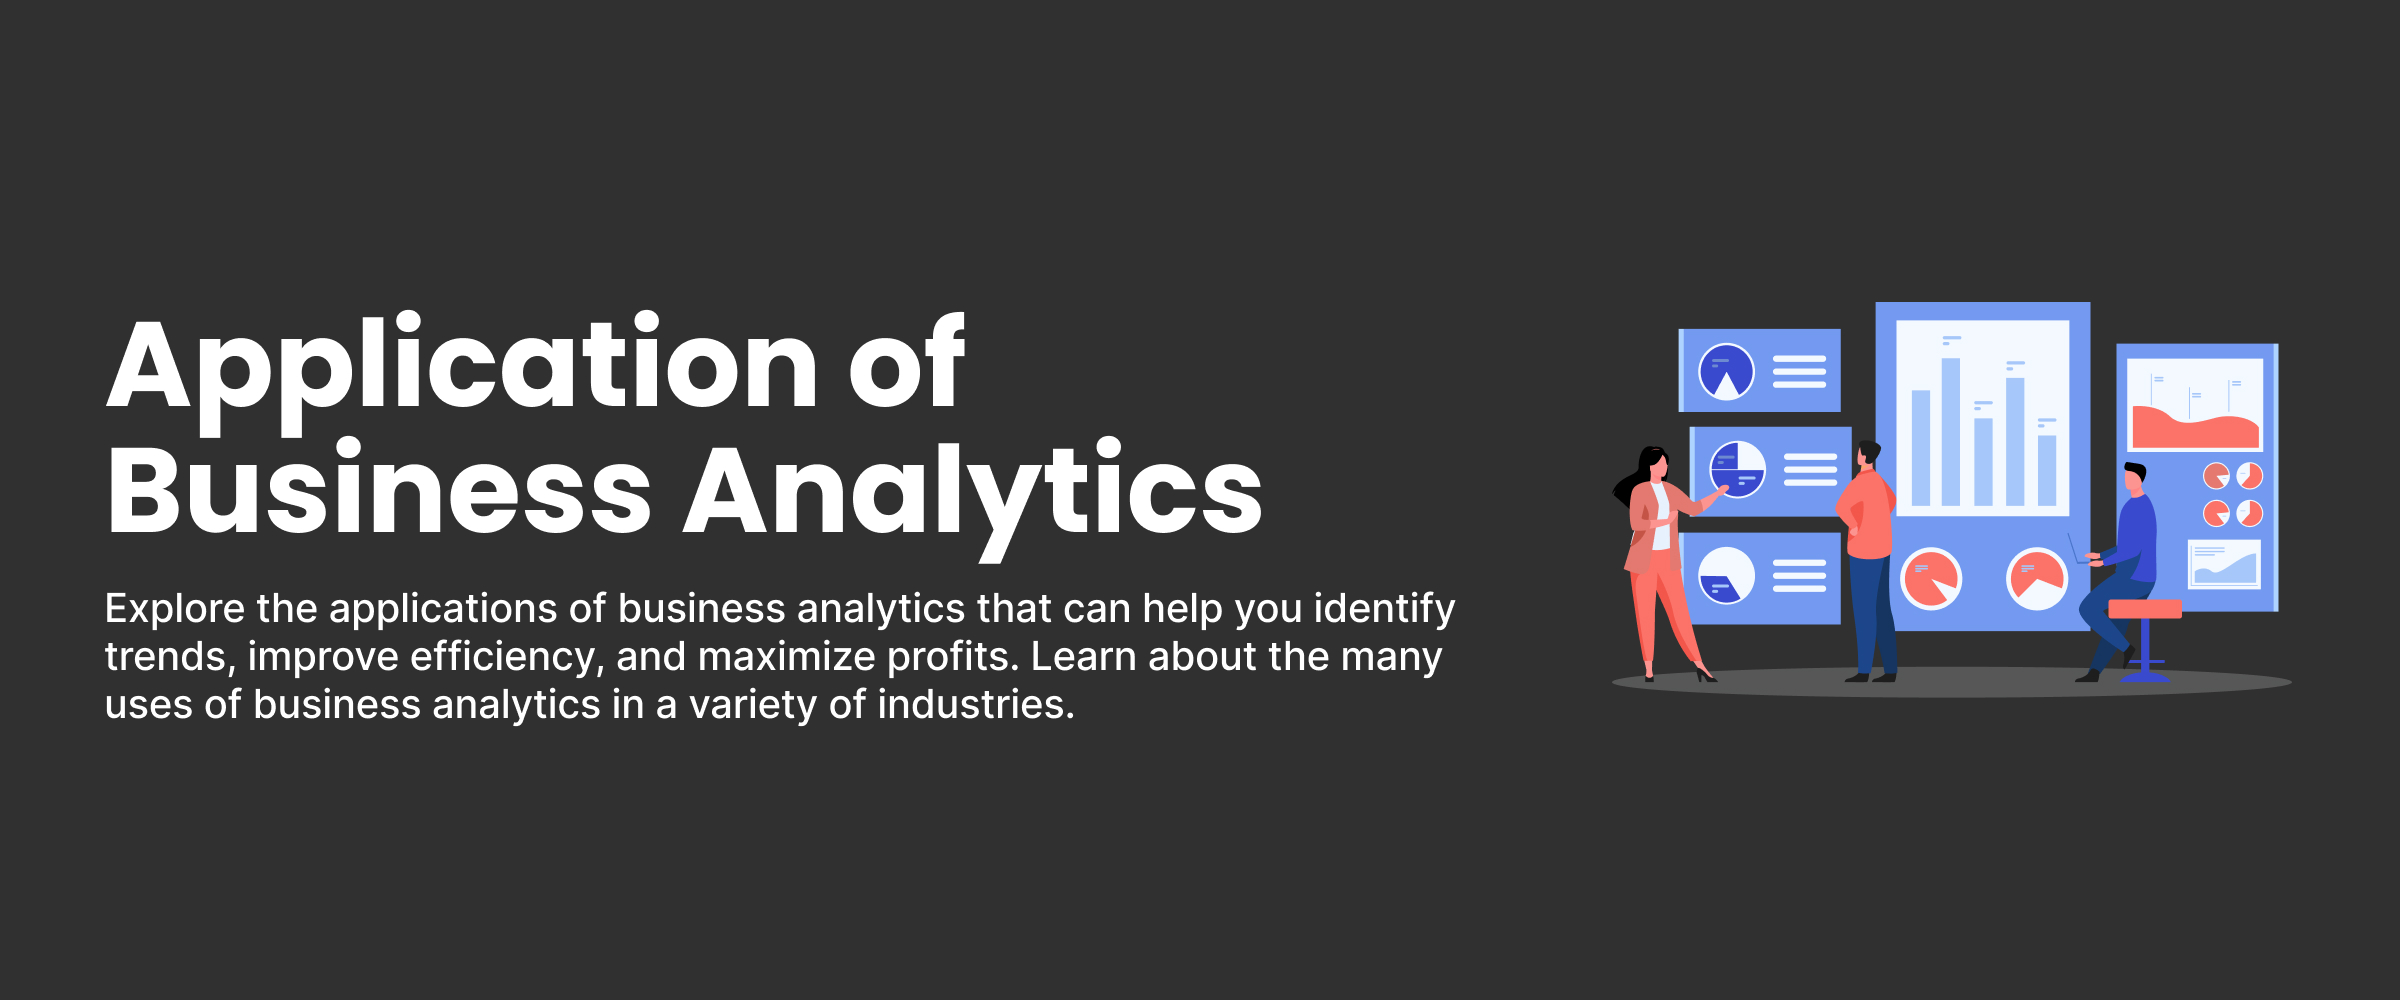 Application of Business Analytics